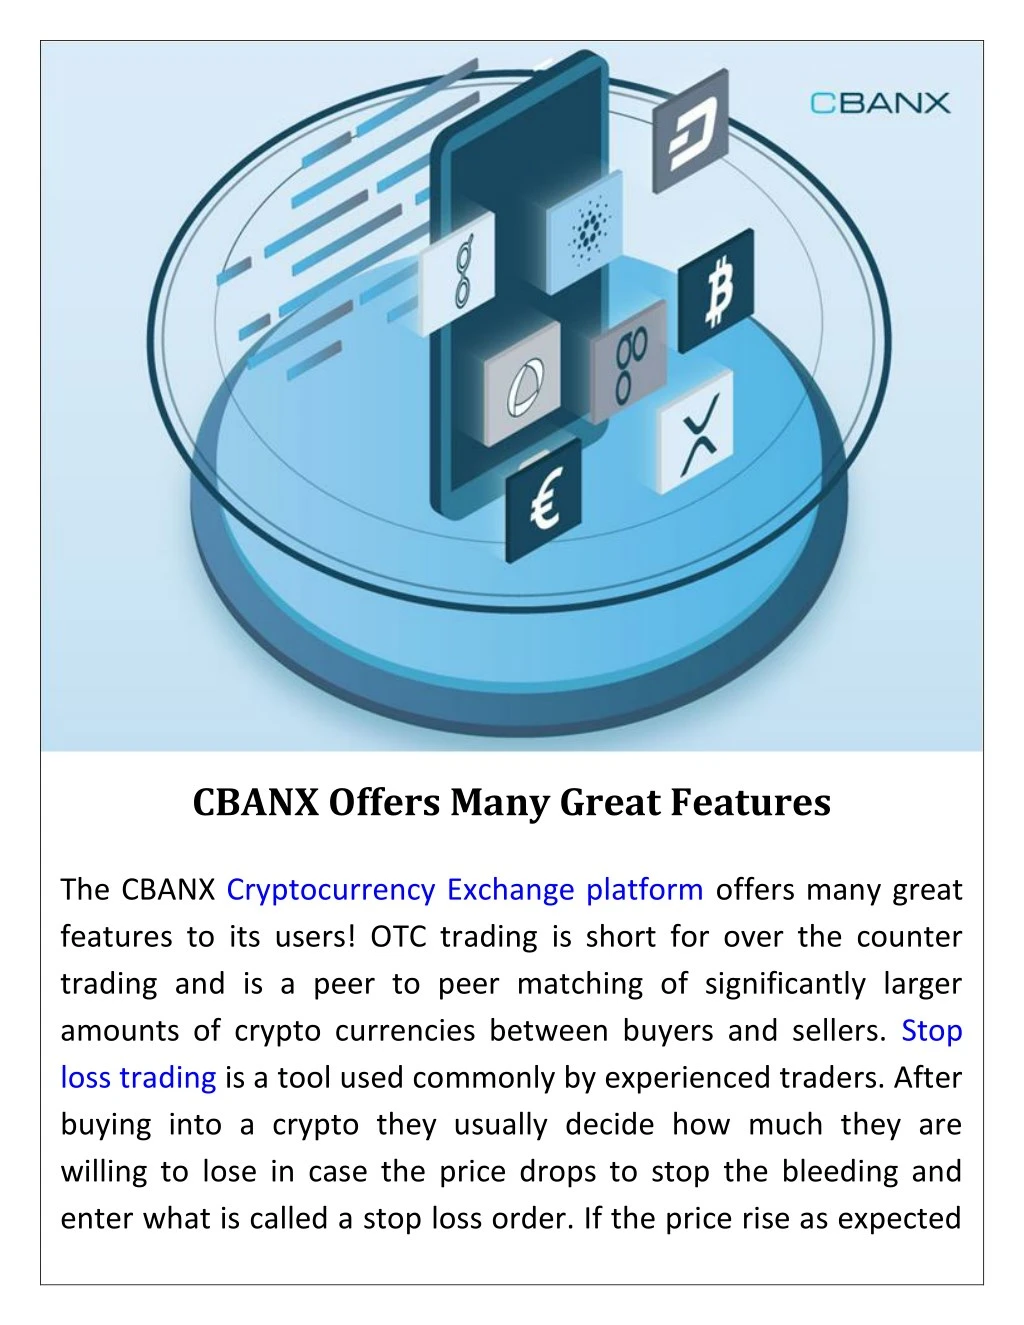 cbanx offers many great features